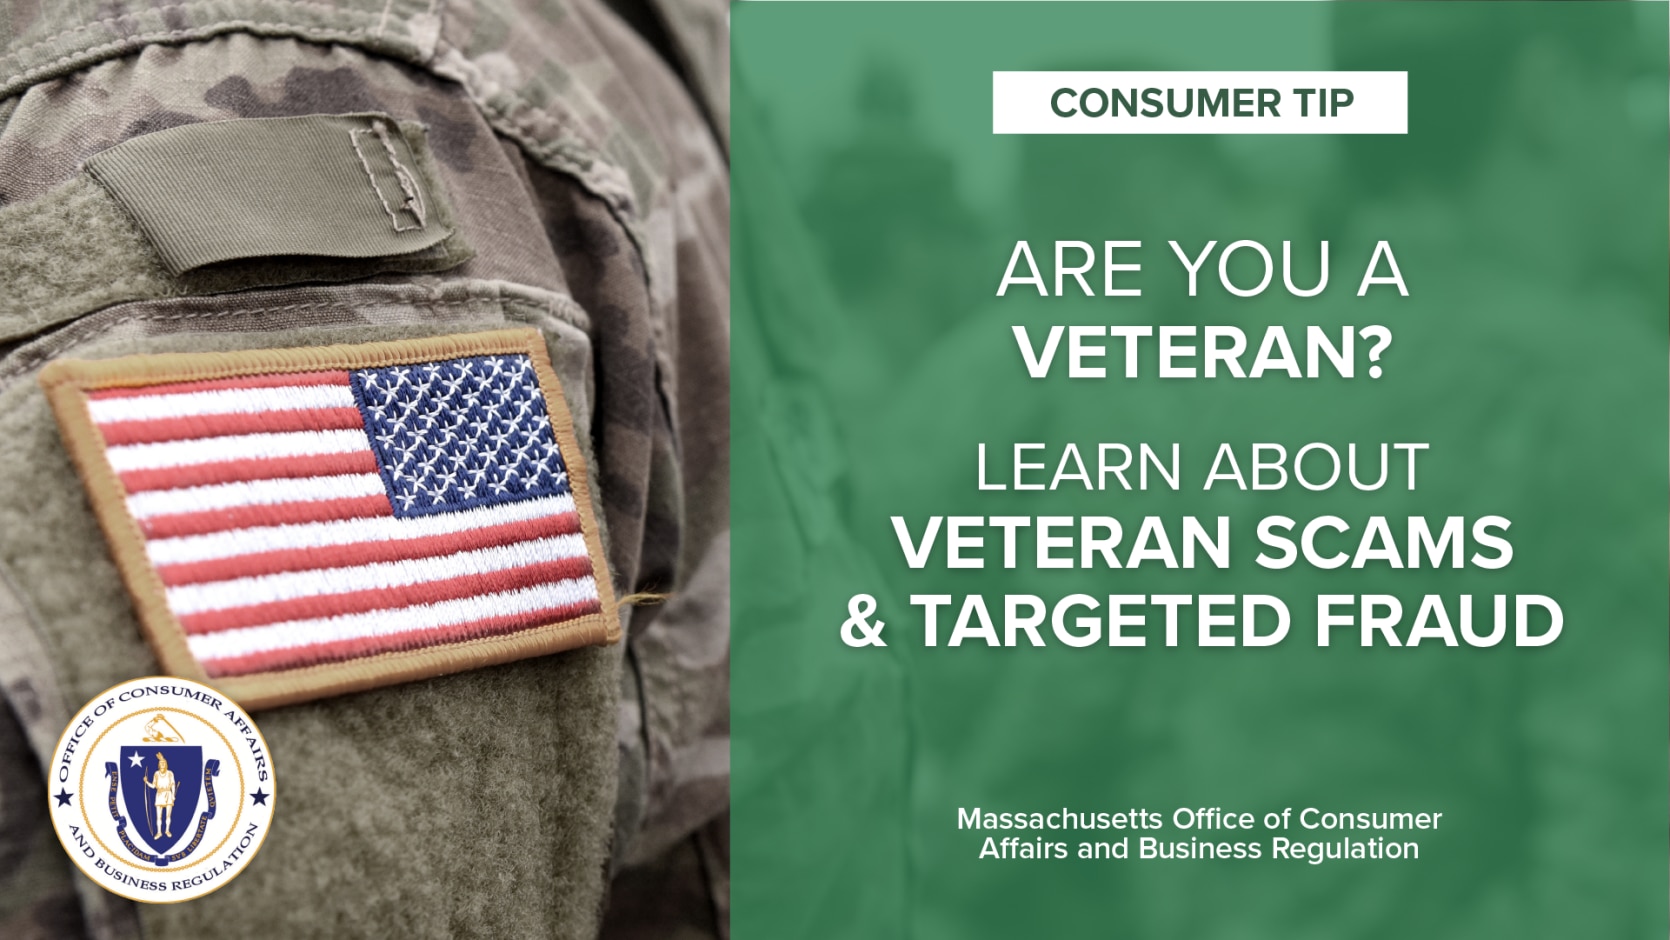 Consumer Tip: Scams and Fraud Targeting the Veteran Population